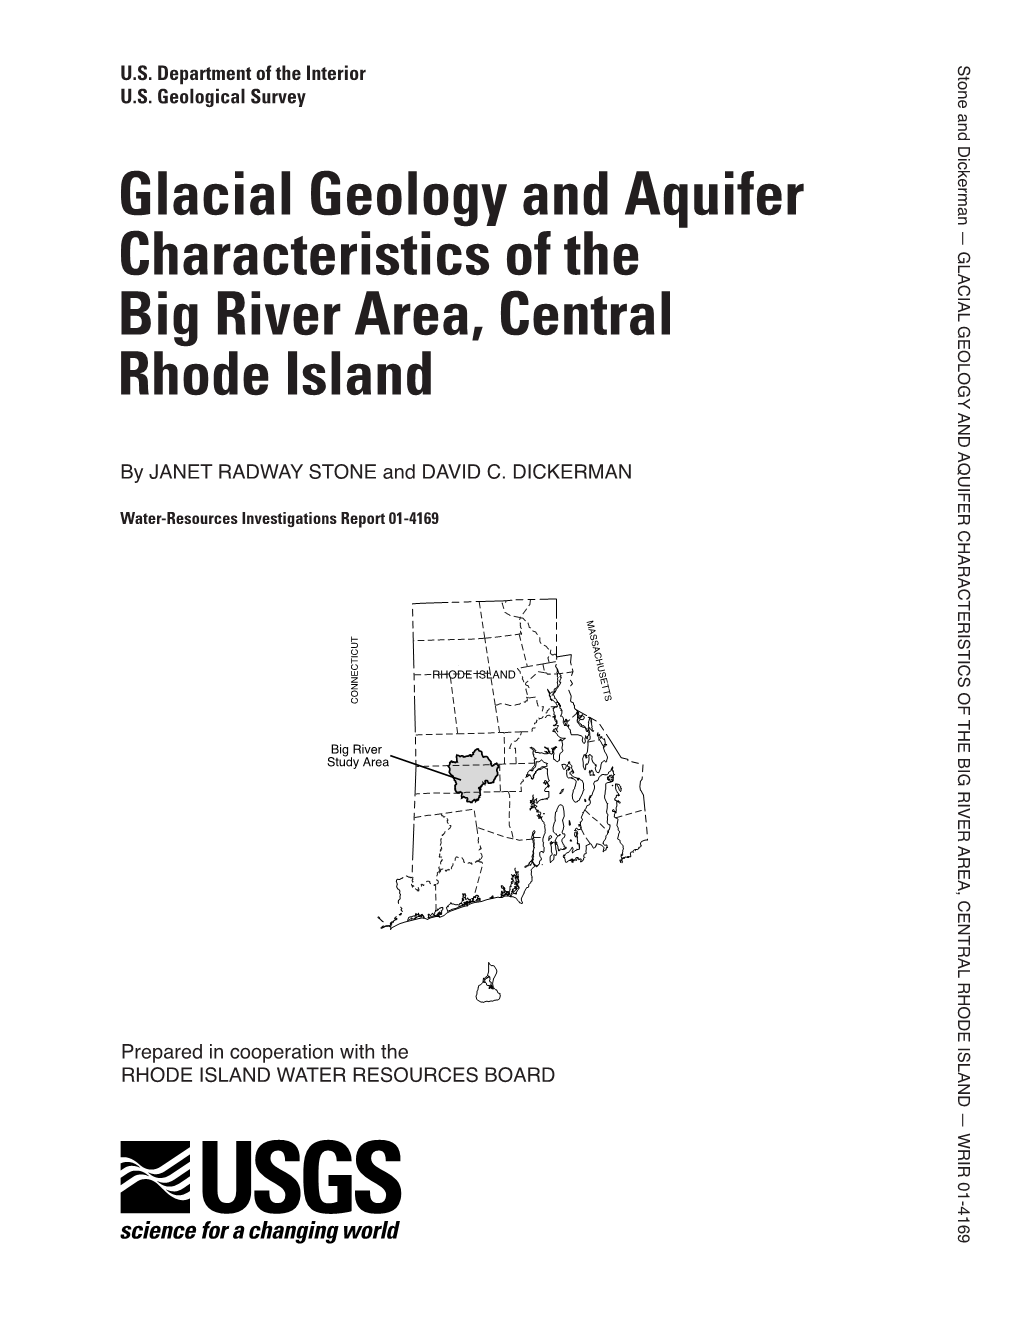 Glacial Geology and Aquifer Characteristics of the Big River Area, Central Rhode Island